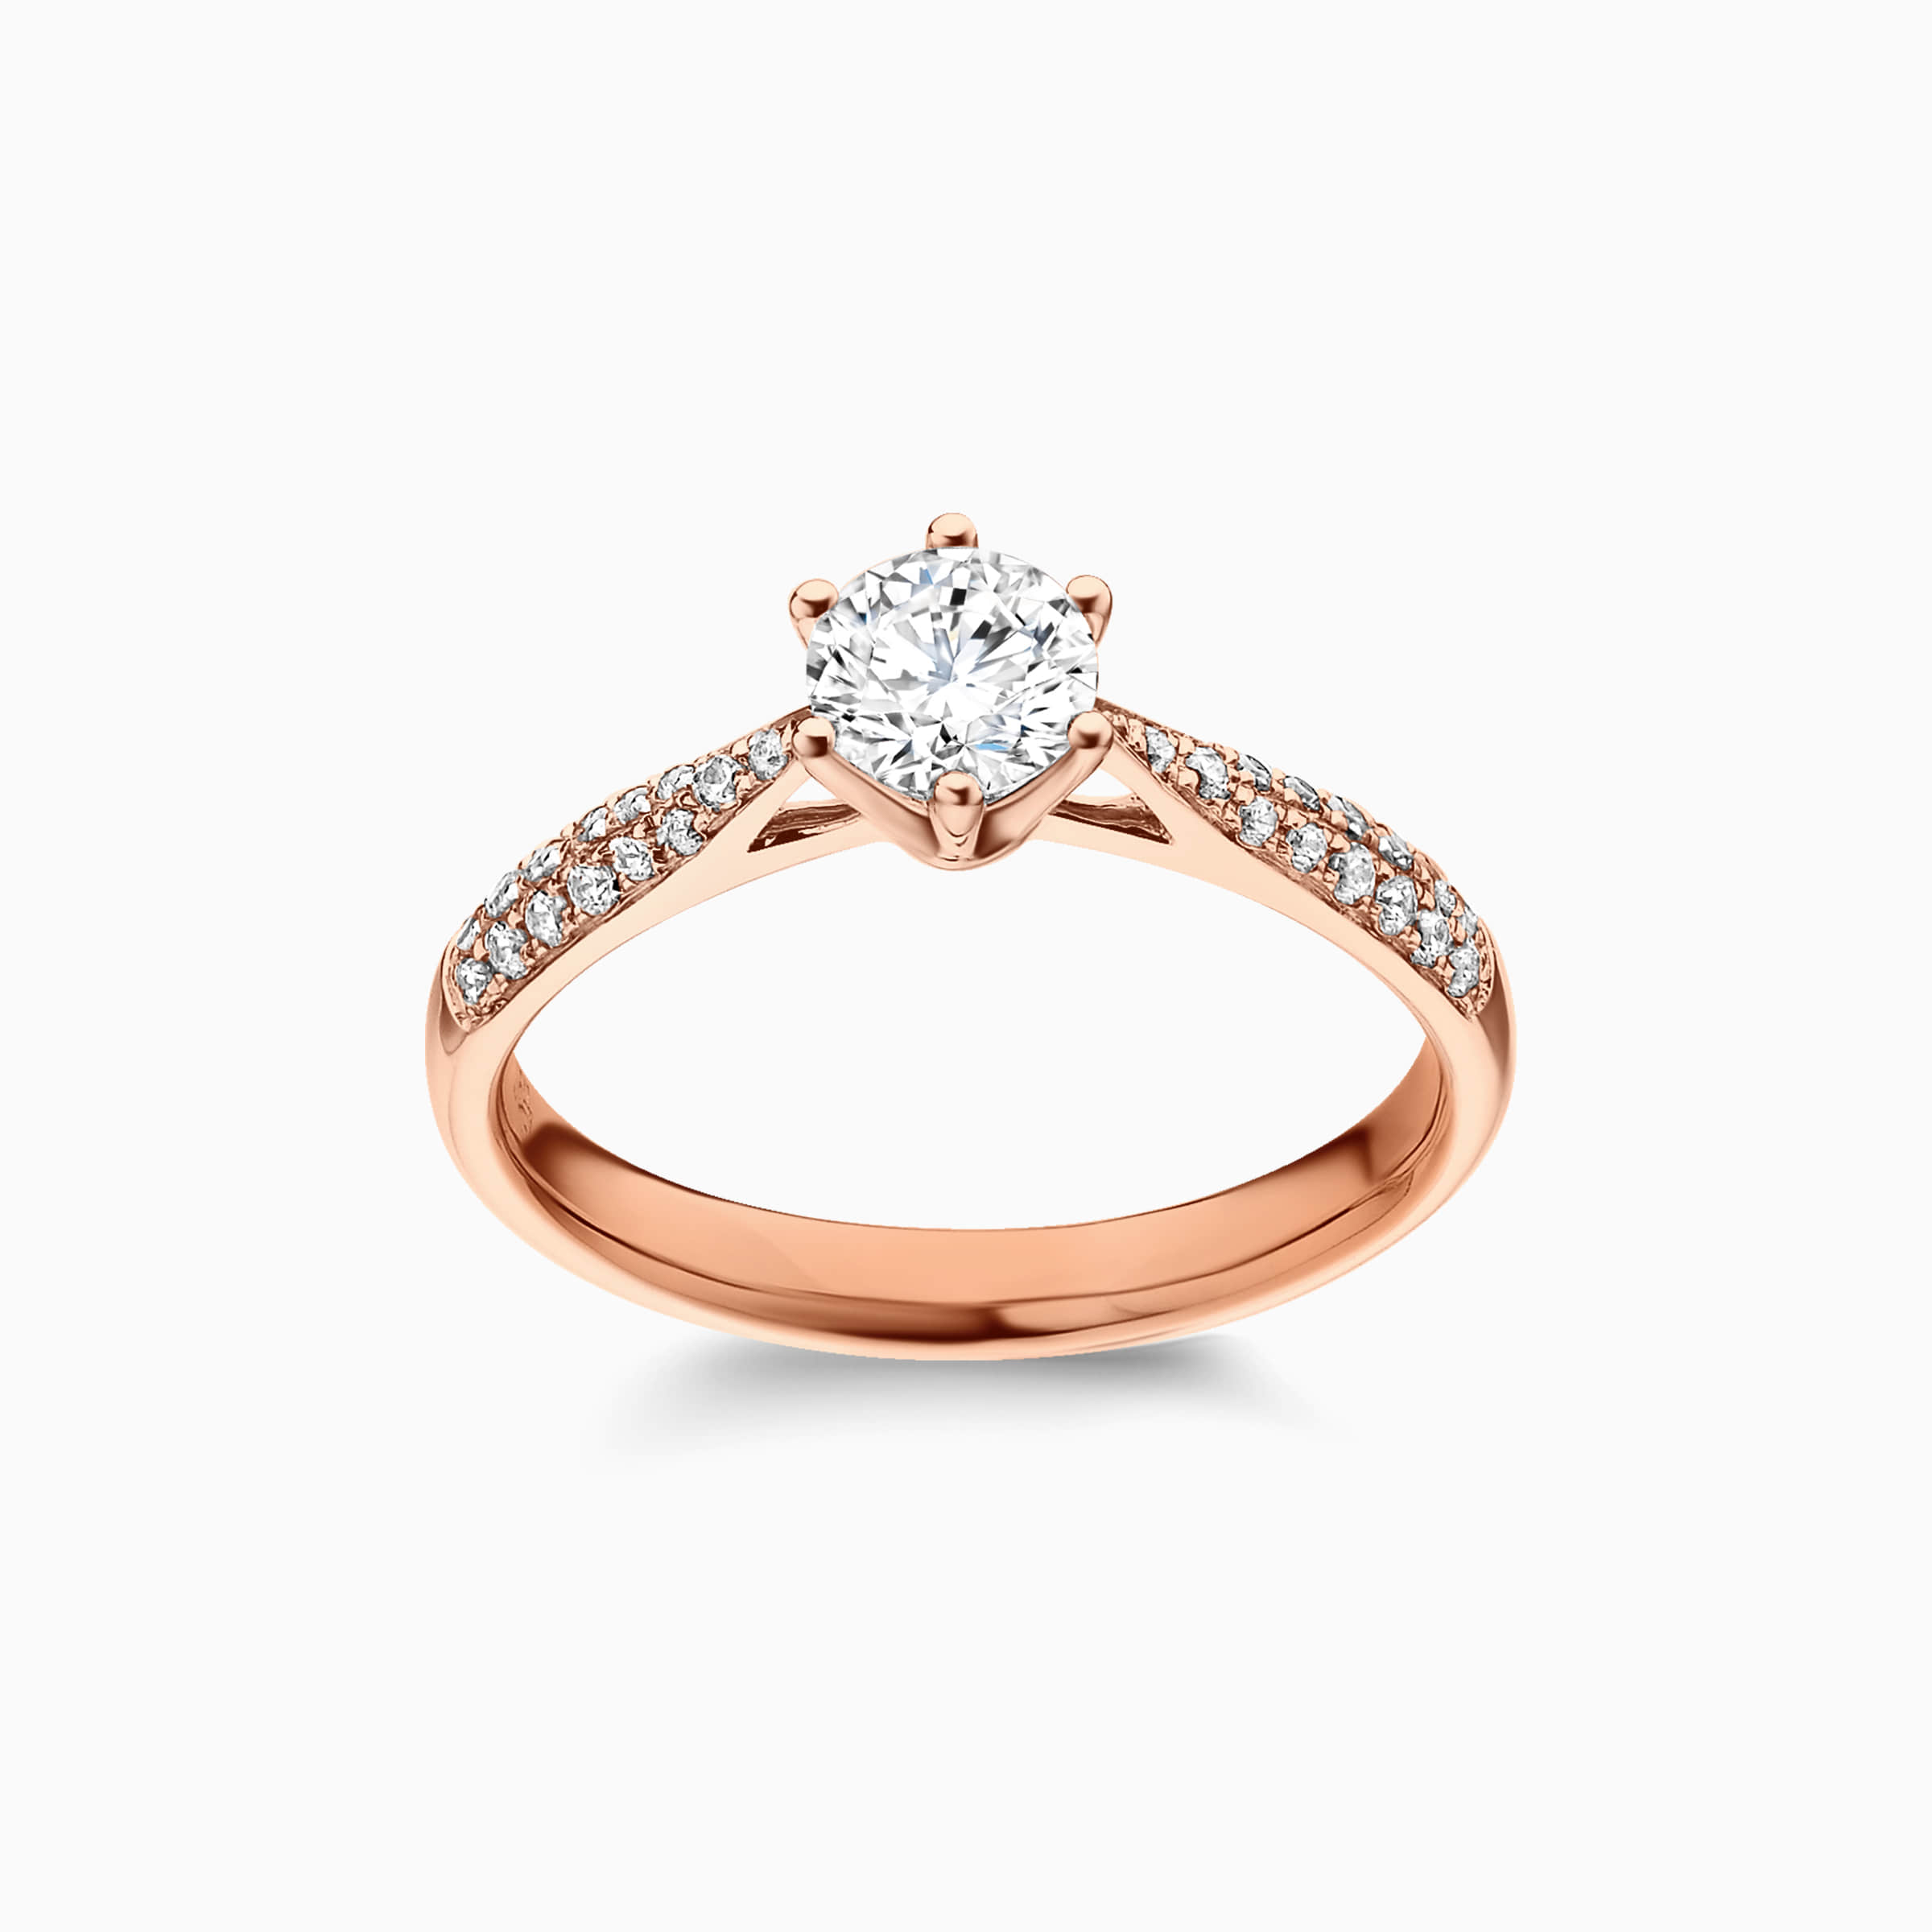 Darry Ring diamond band engagement ring in rose gold